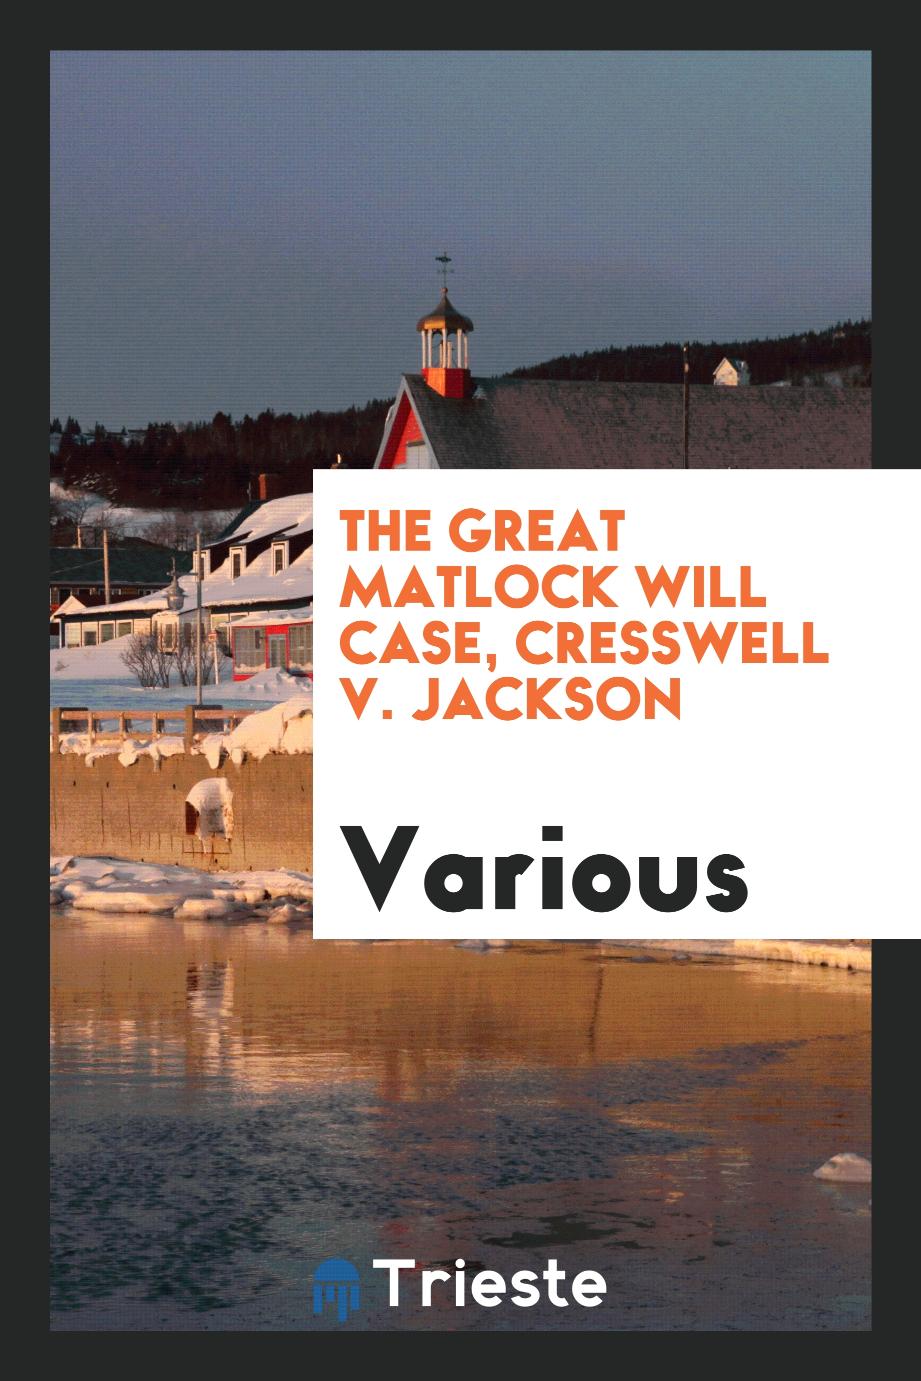 The Great Matlock Will Case, Cresswell v. Jackson